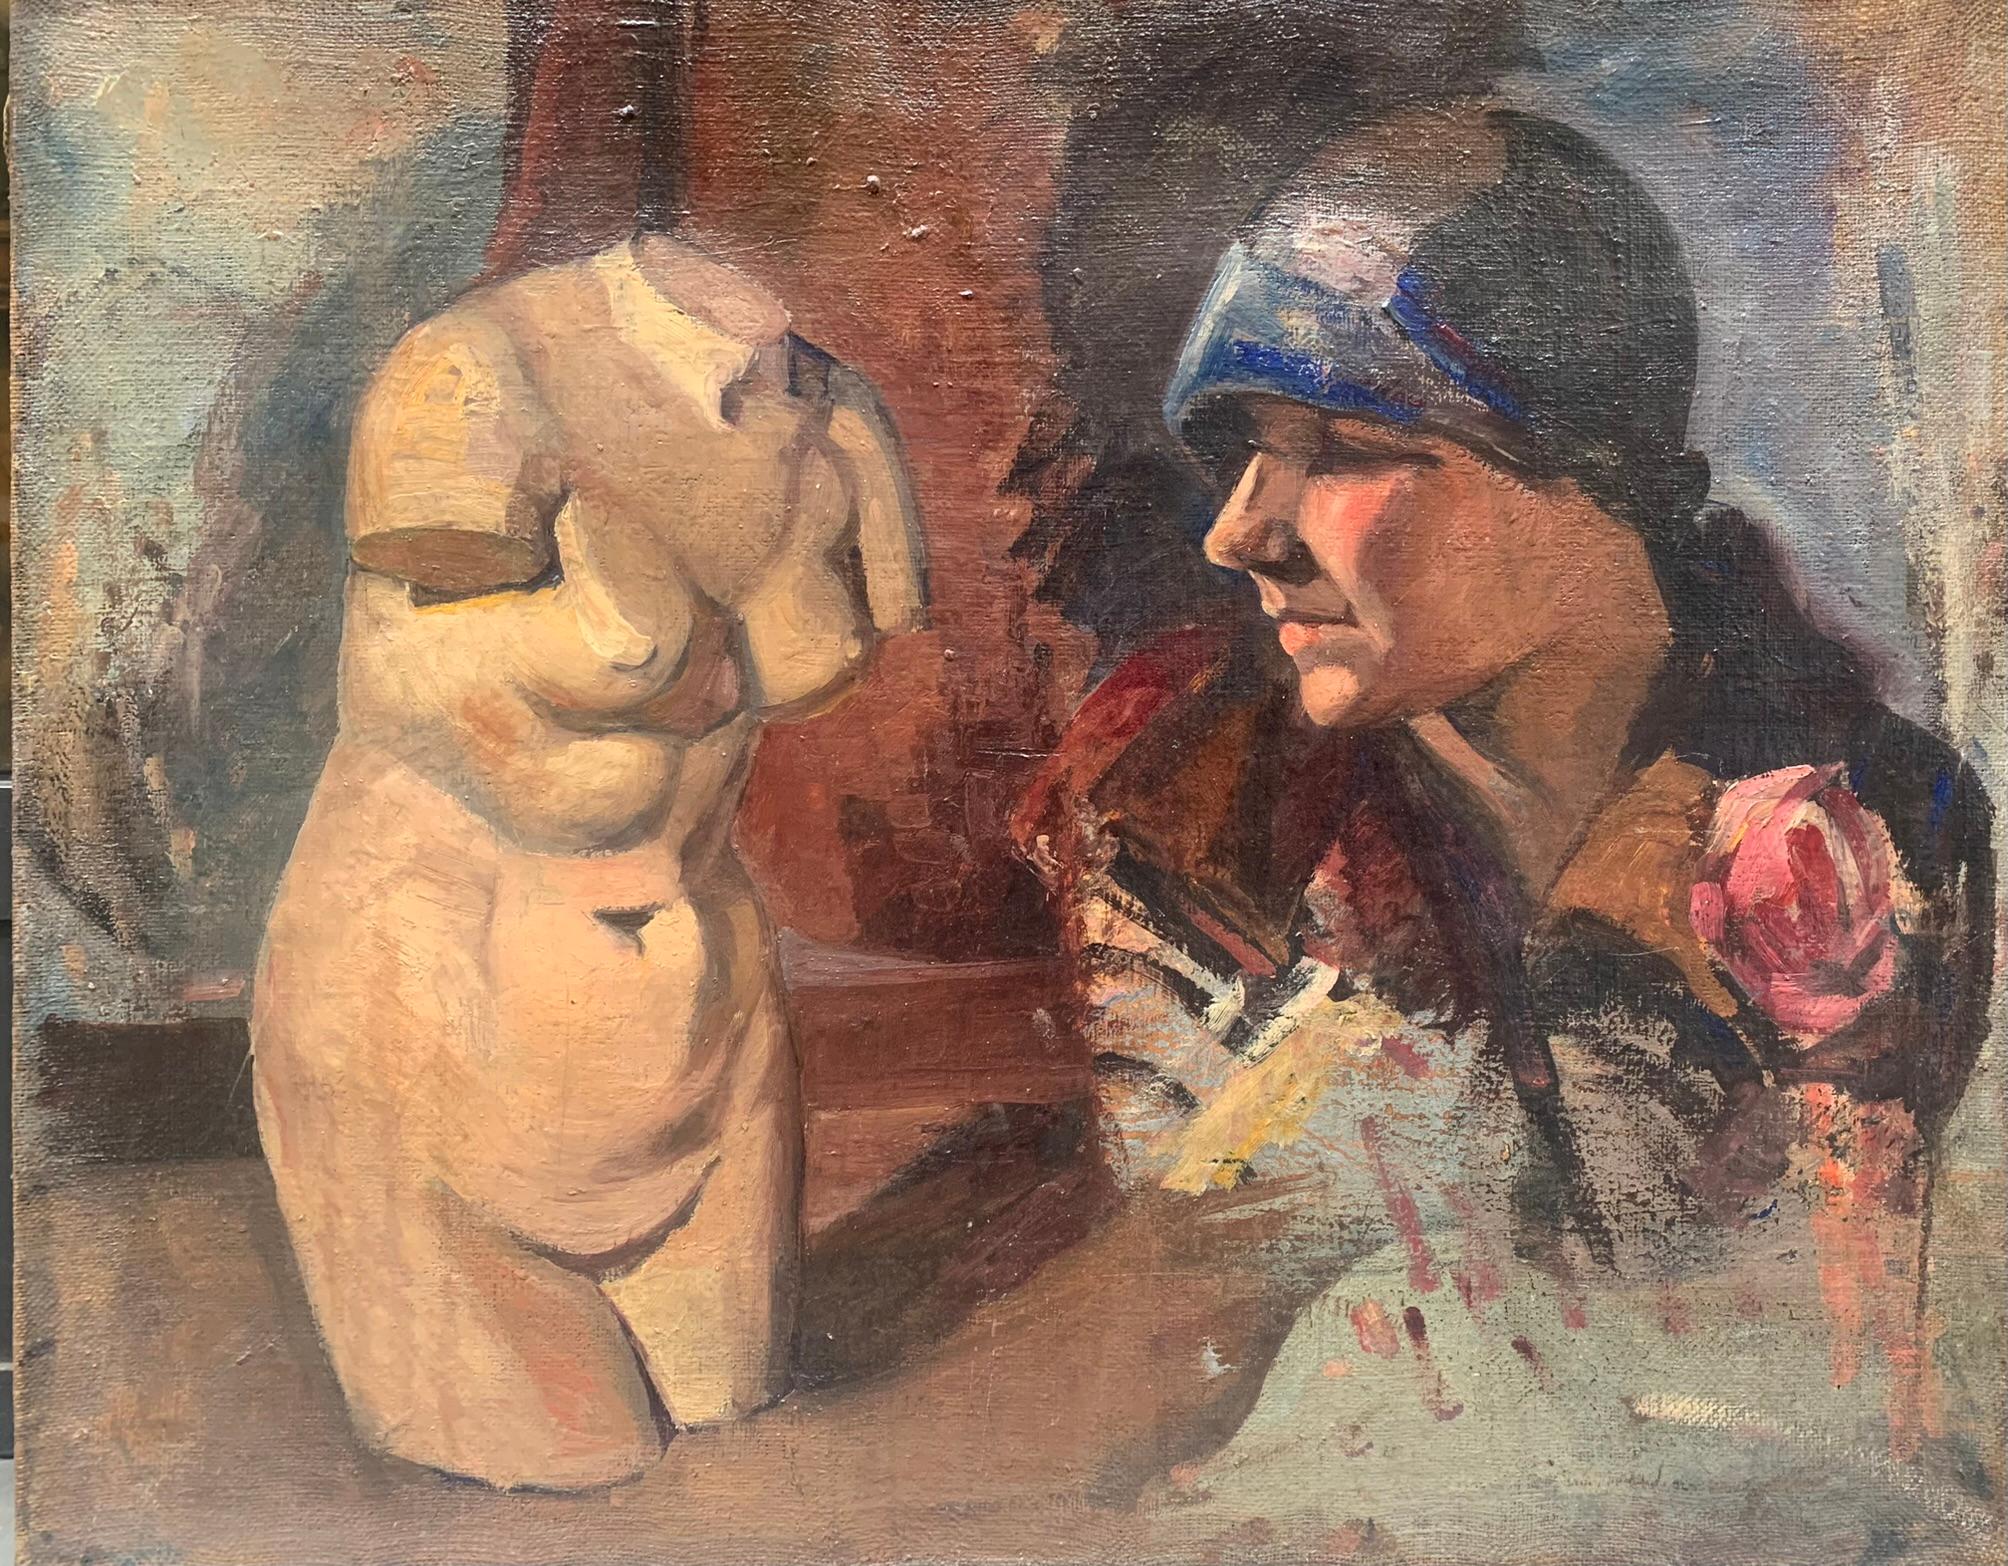 Female Torso And Portrait Of The 1920s. Double Sketch On Canvas.